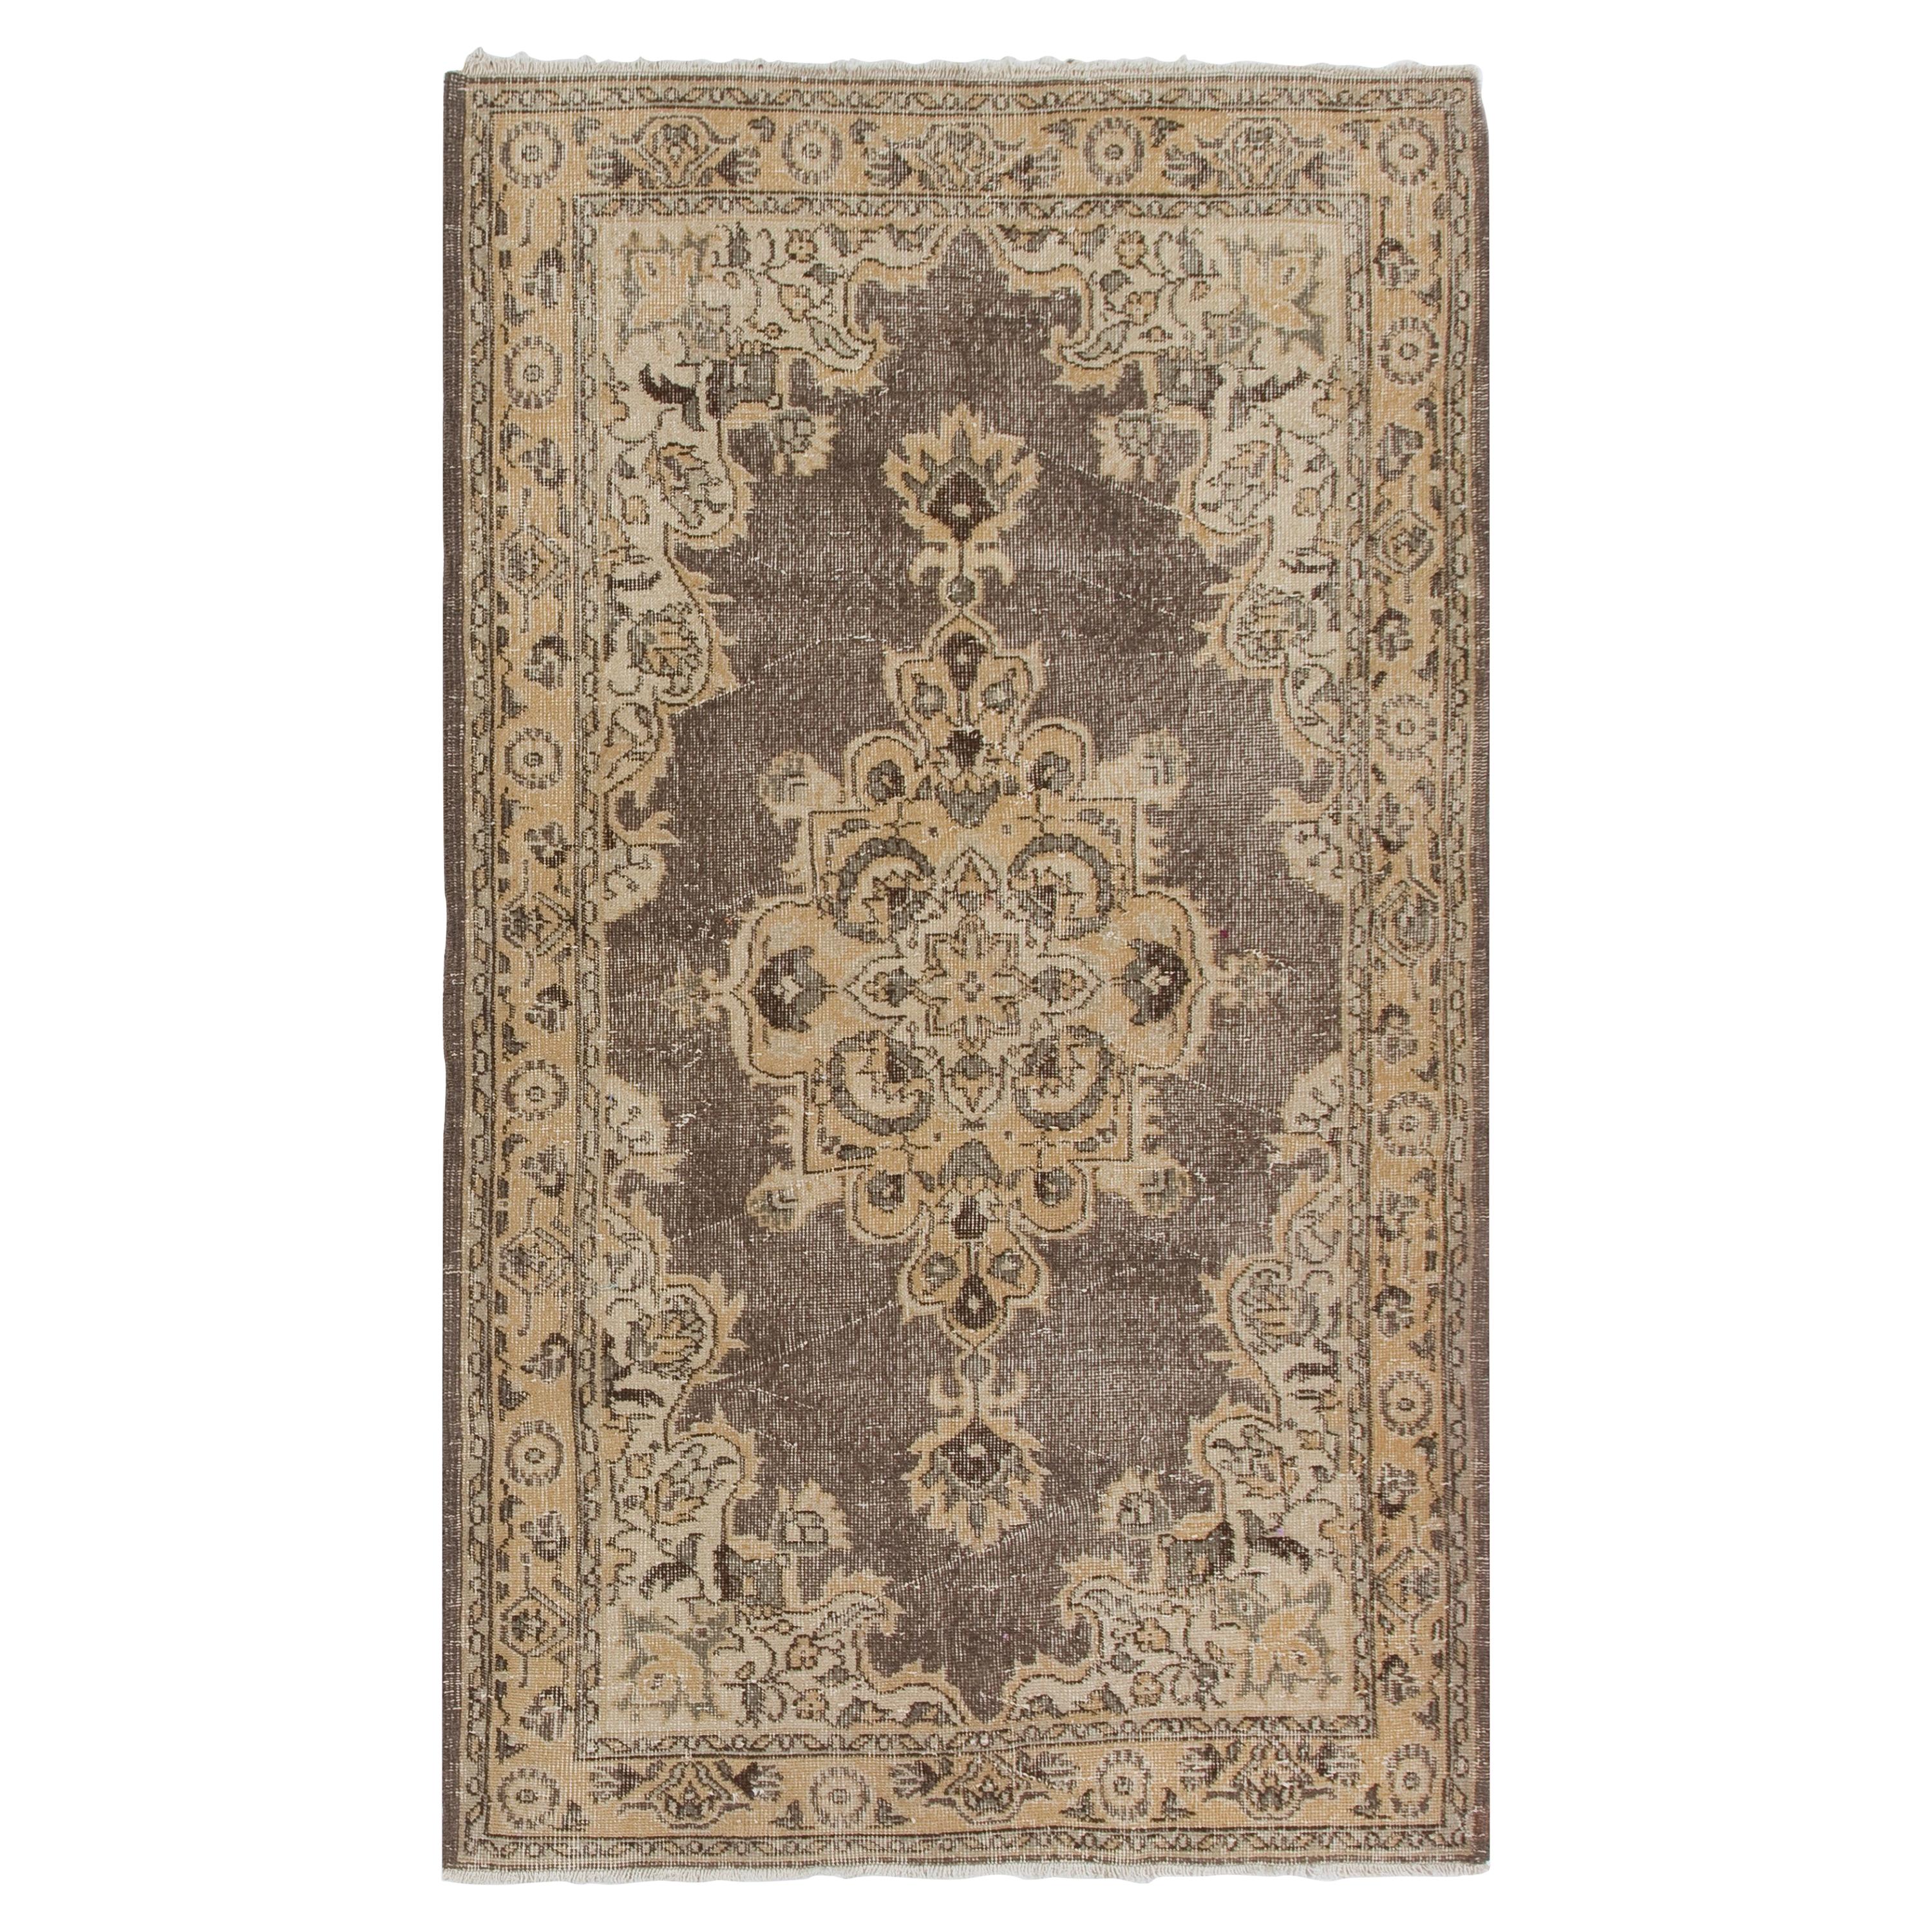 4x6.8 Ft Vintage Hand-Knotted Distressed Wool Accent Rug in Earthy Colors For Sale